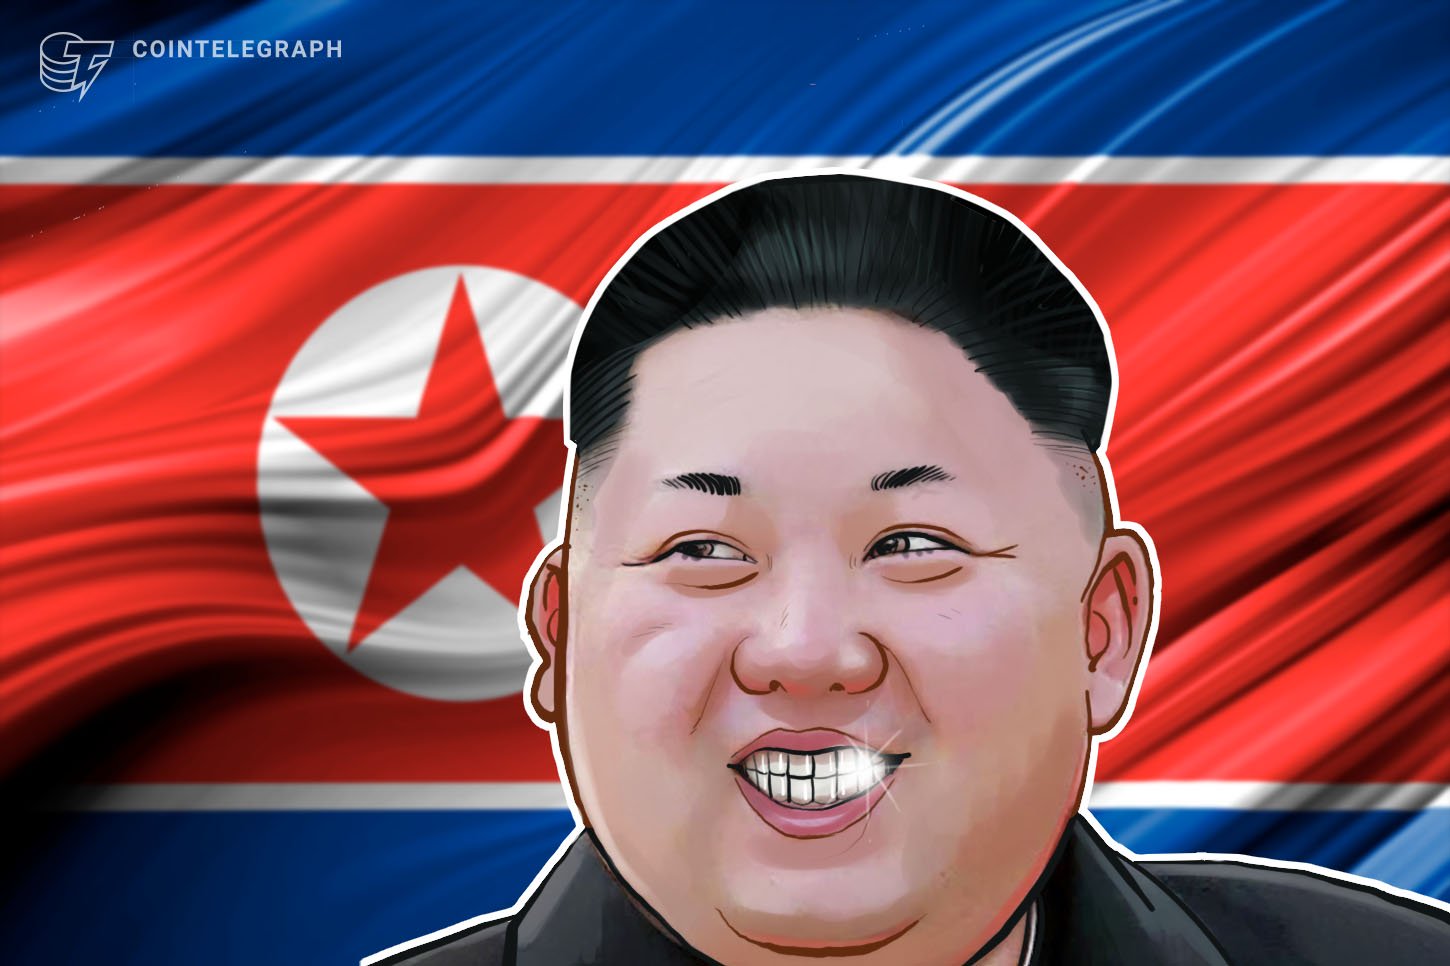 Kim Jong-Un in Good Well being, Crypto Will Assist Combat Imperialism